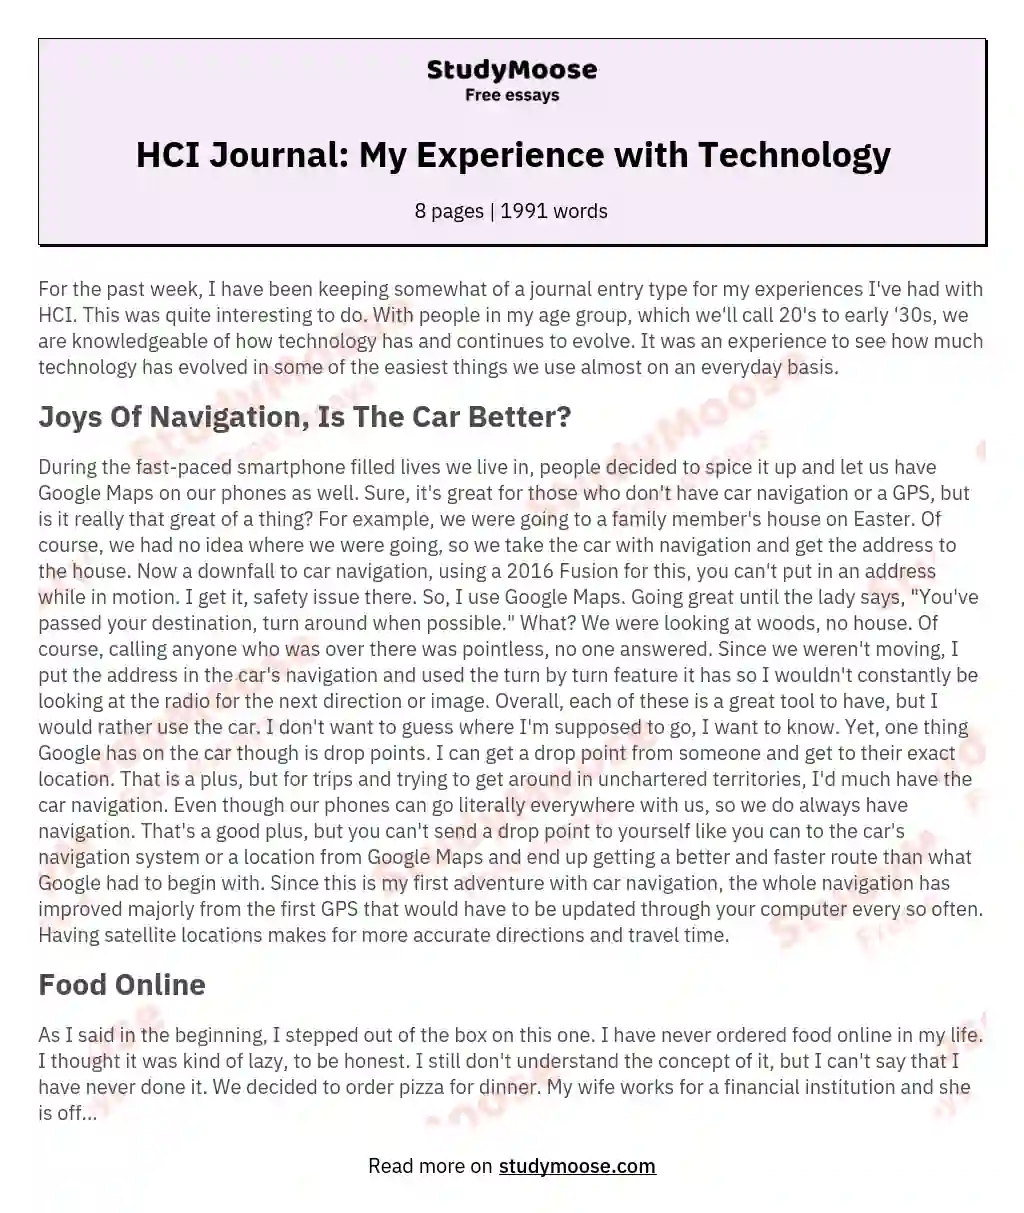 HCI Journal: My Experience with Technology